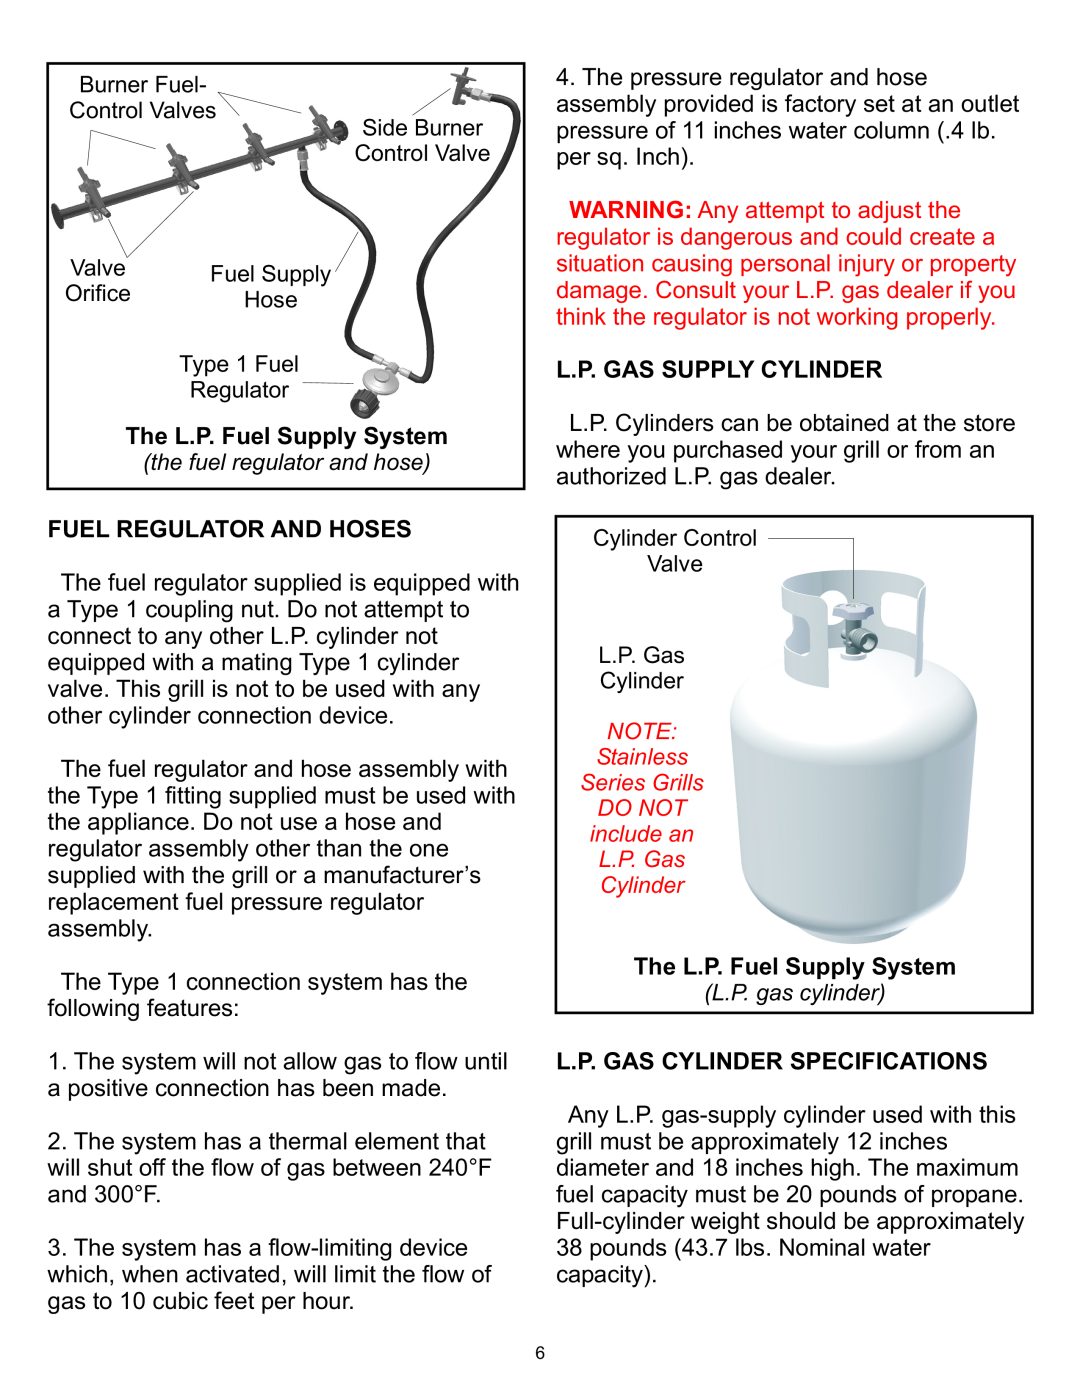 Vermont Casting Gas Grill owner manual The L.P. Fuel Supply System, Fuel Regulator And Hoses, L.P. Gas Supply Cylinder 